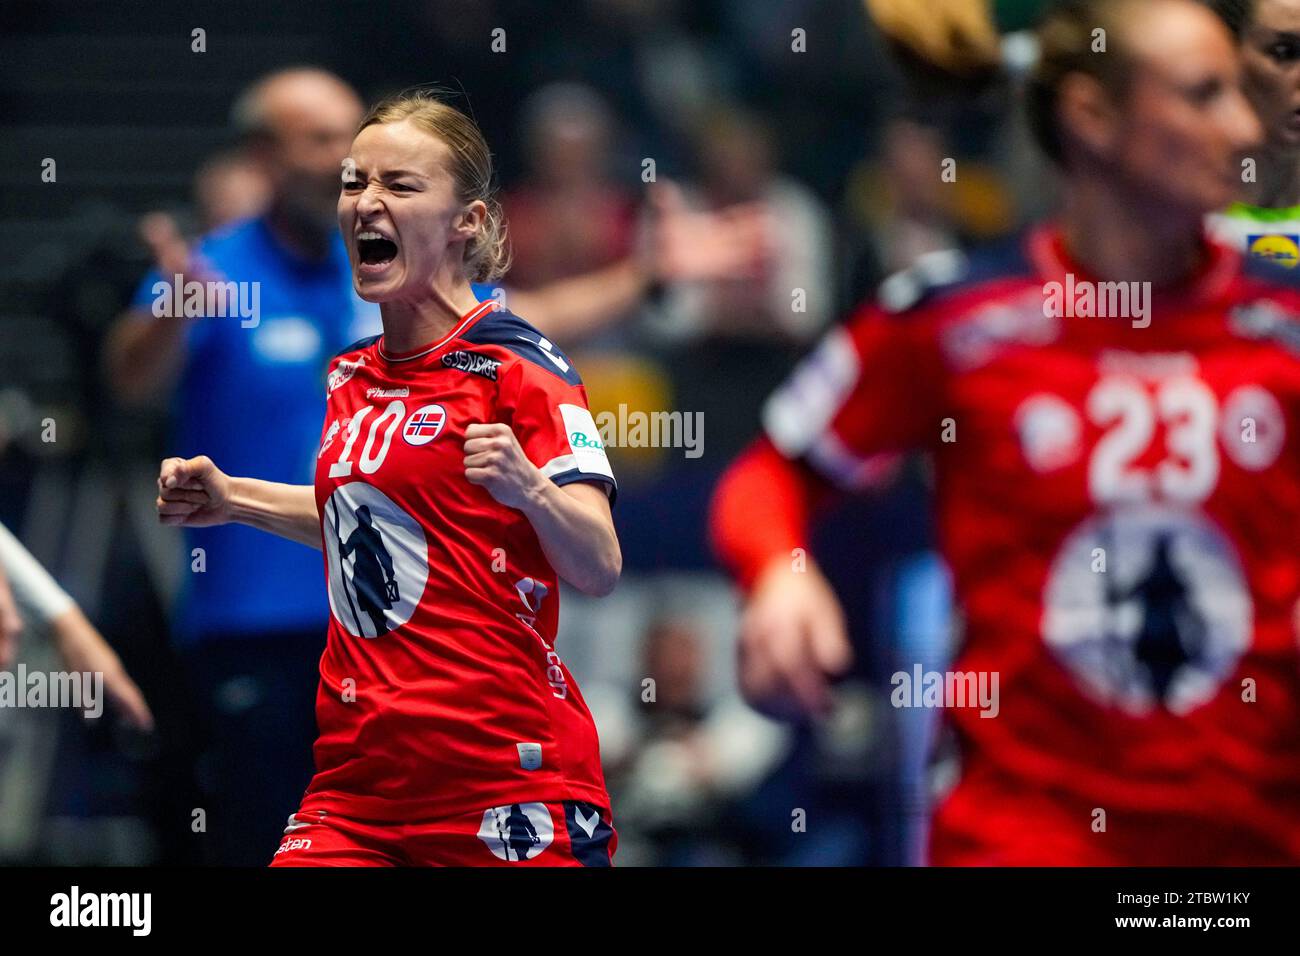 Trondheim 20231208.Stine Bredal Oftedal during the World Championship match in the main round between Slovenia and Norway in Trondheim Spektrum. Photo: Beate Oma Dahle / NTB Stock Photo